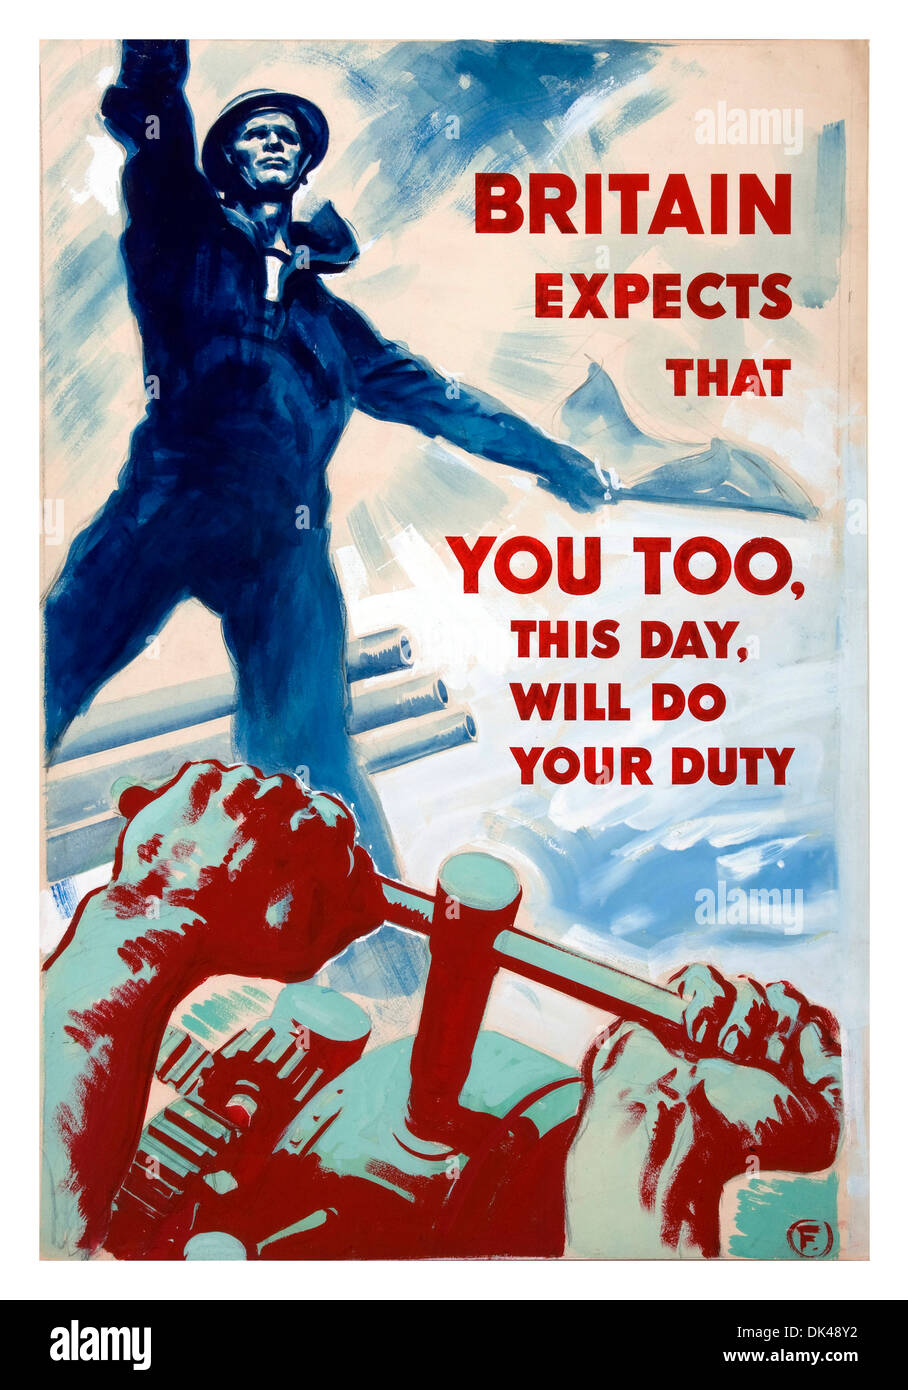 WW2 propaganda poster promoting hard work at home in the UK during wartime using Lord Nelsons famous words 'Britain expects....' Stock Photo